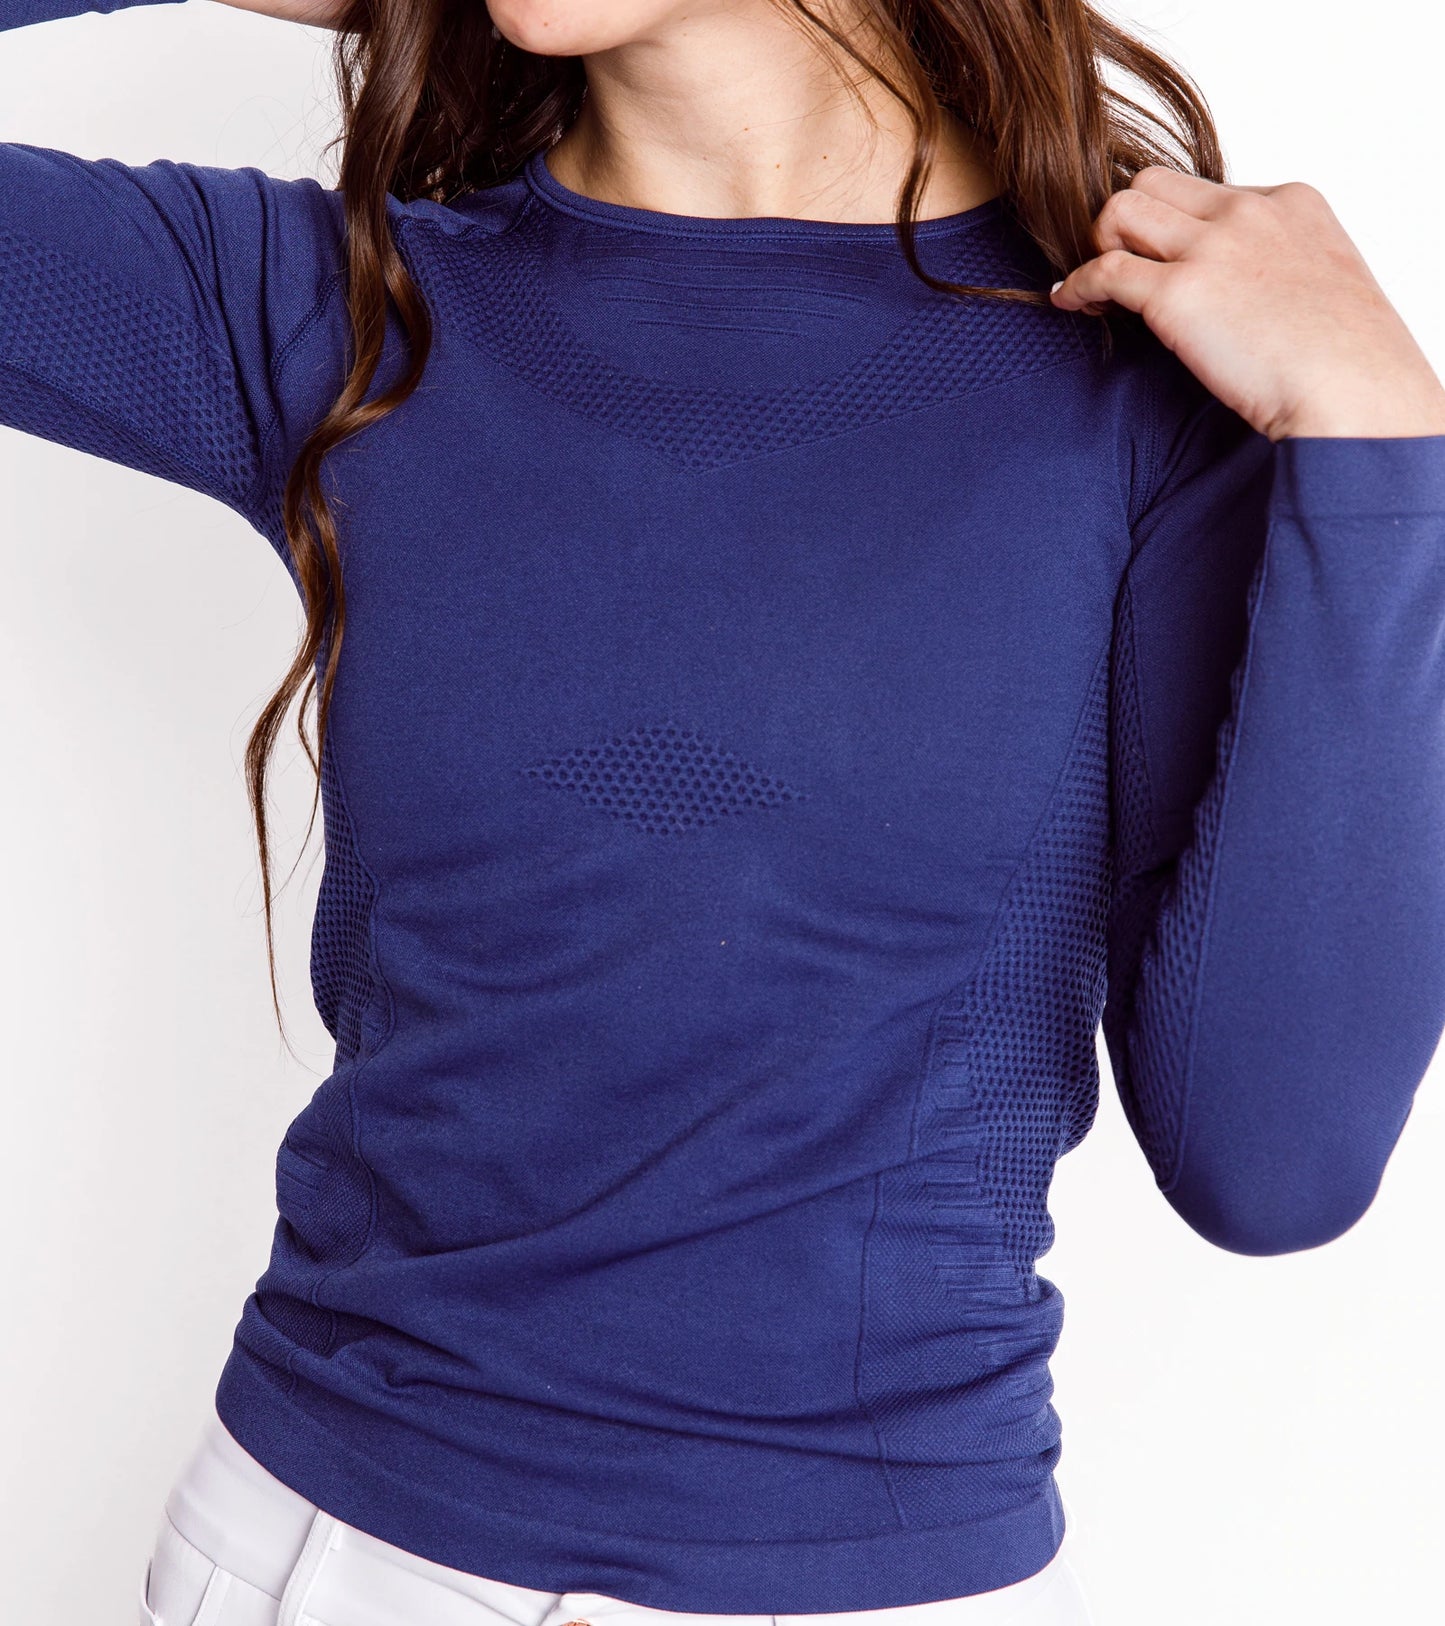 Calliope-Coeur Long sleeve compression top